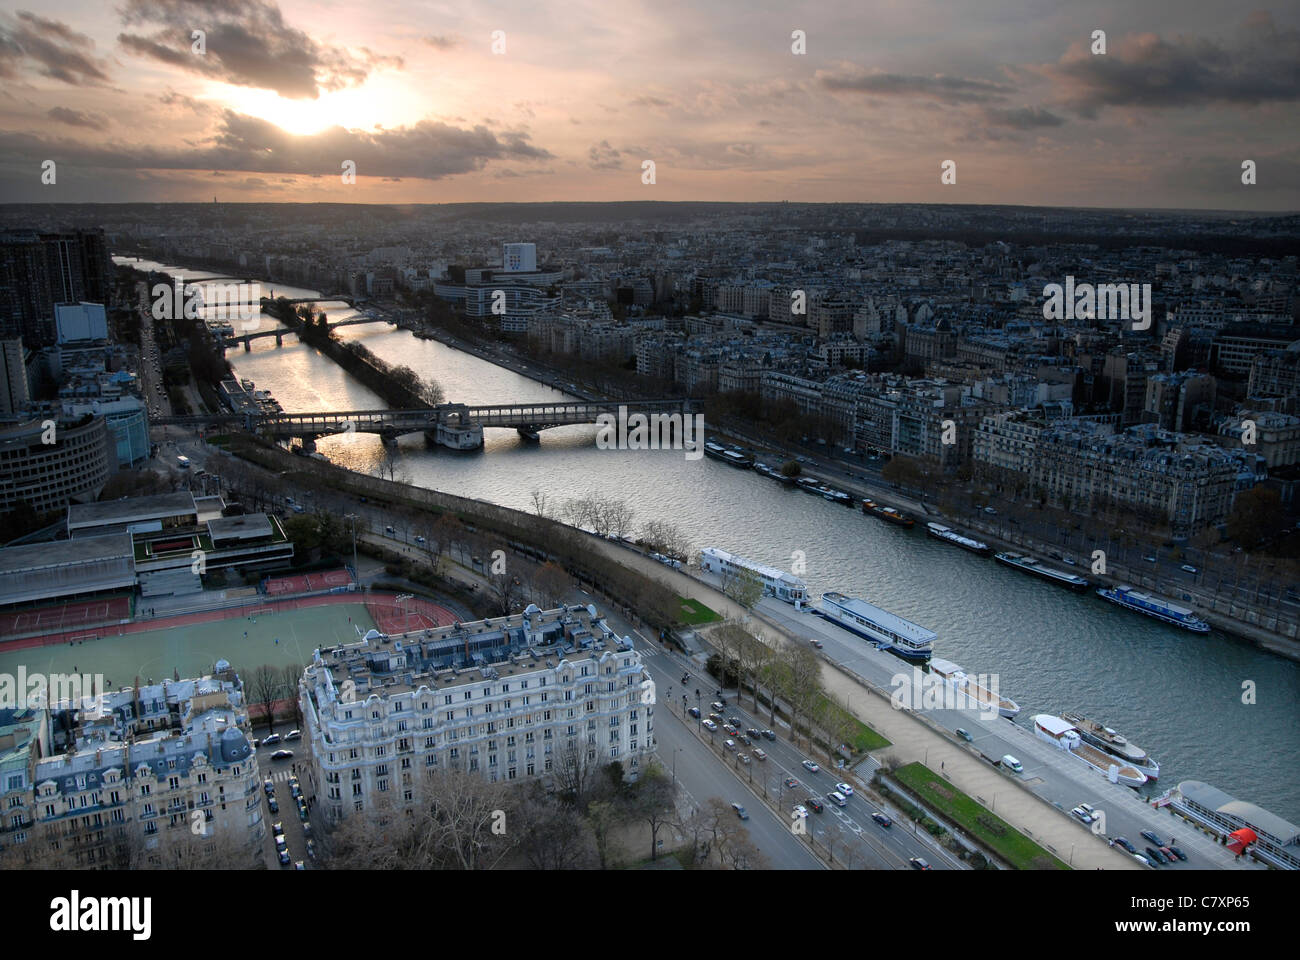 The River Seine from the Eiffel Tower, Paris. Stock Photo